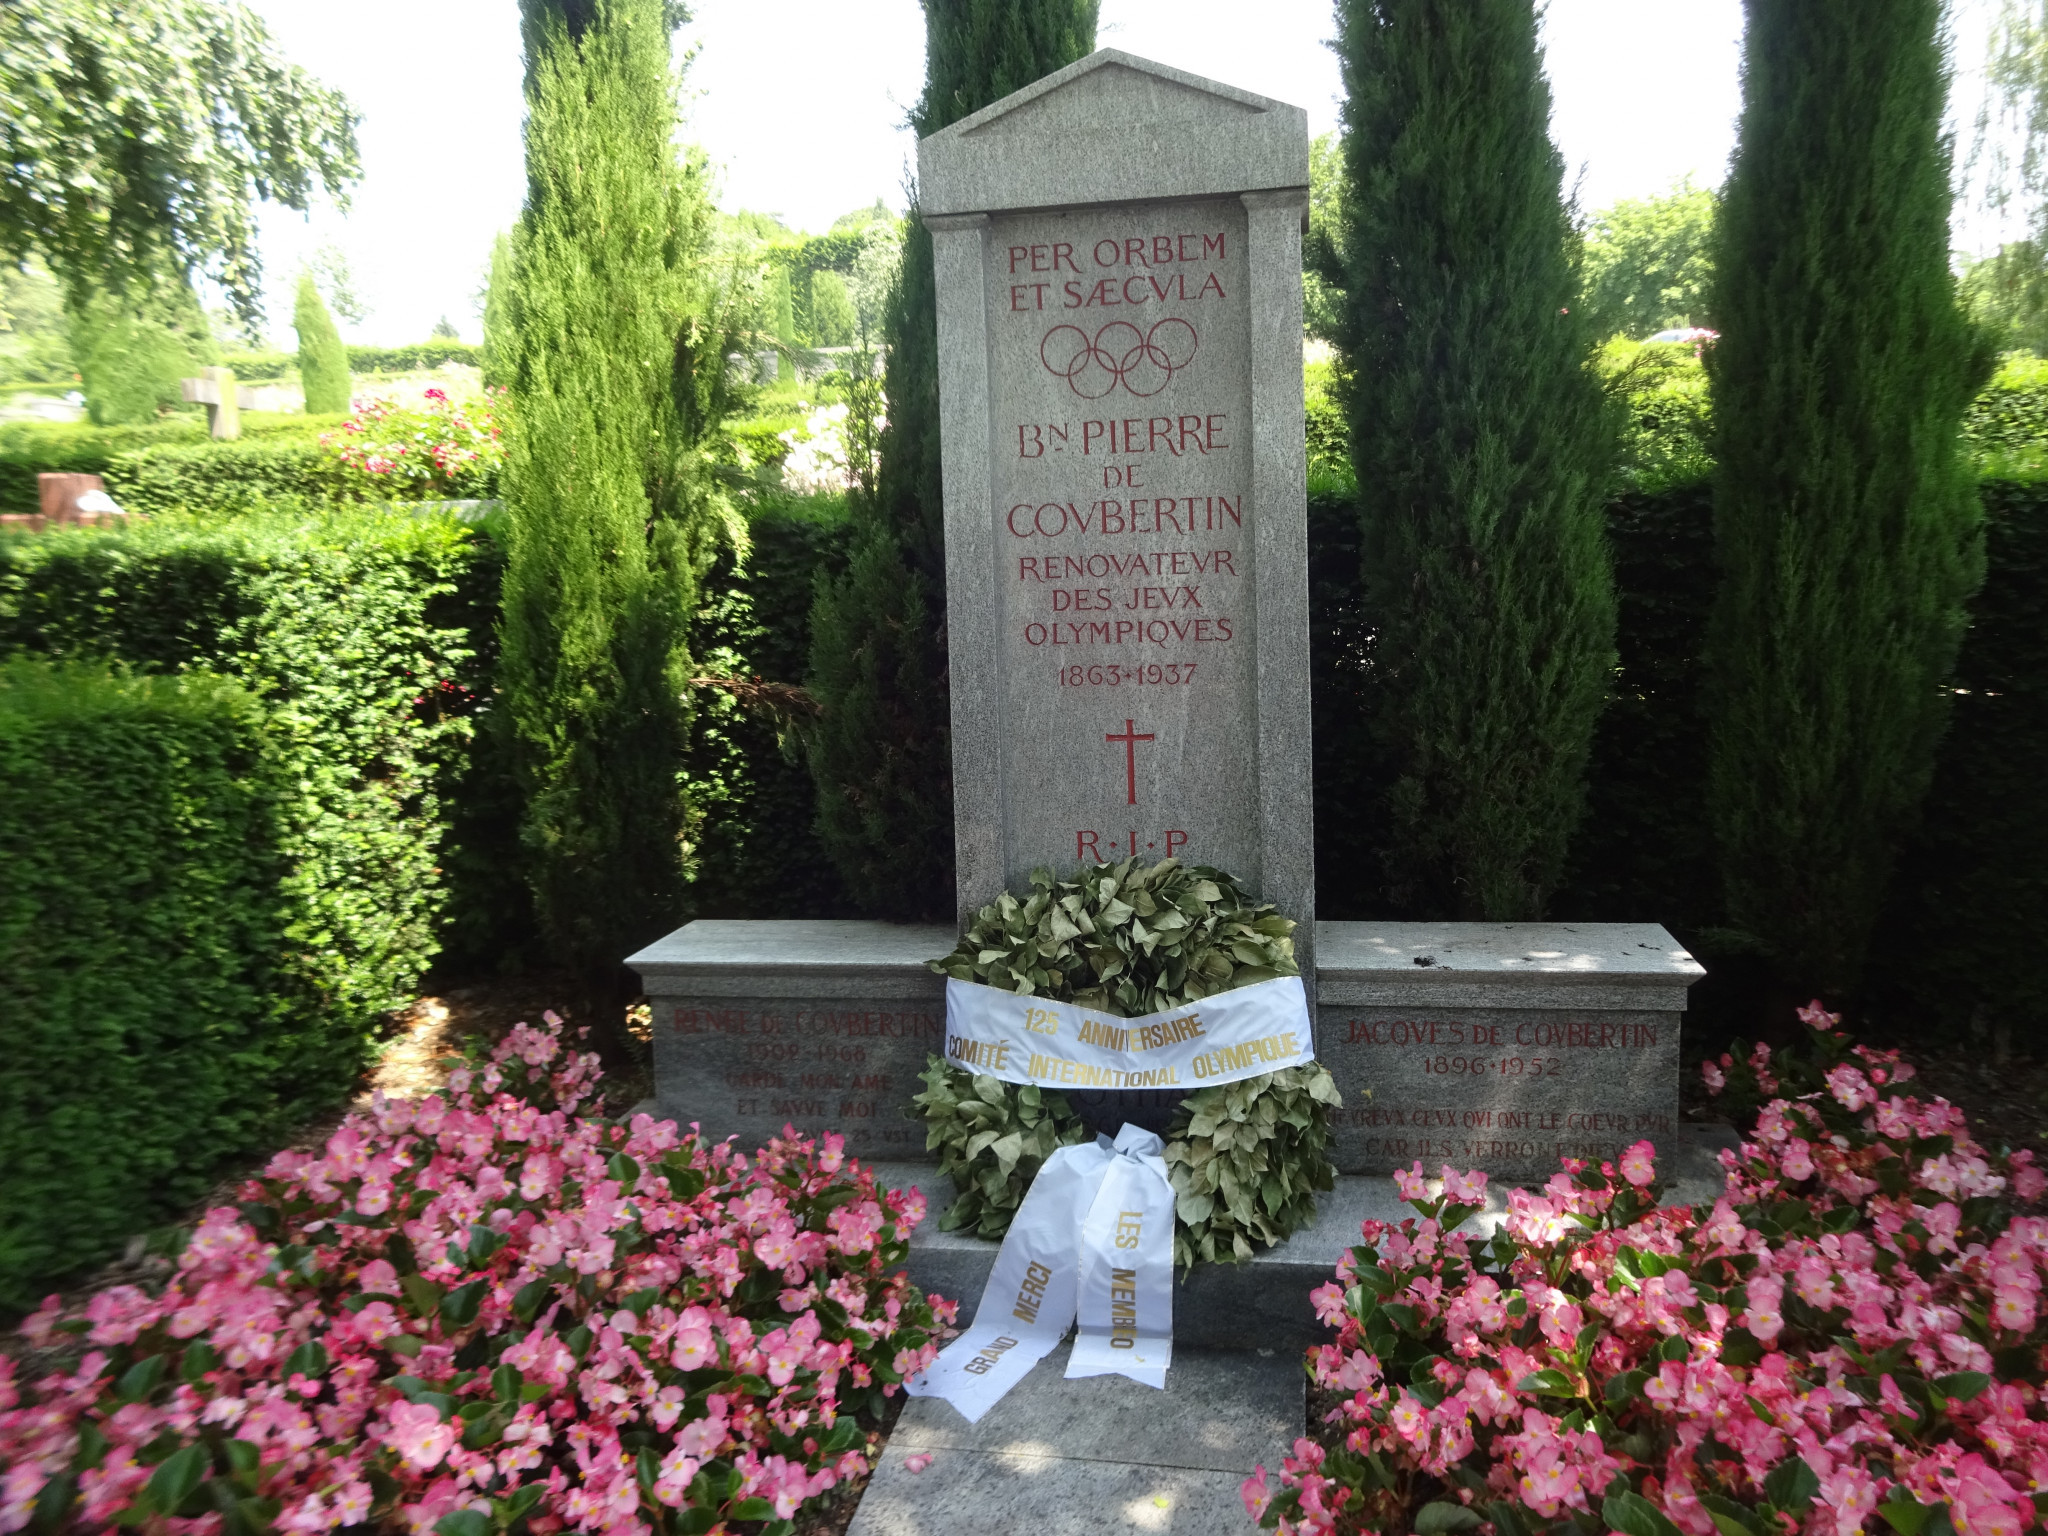 Pierre de Coubertin's grave in Lausanne was decorated with a wreath on the occasion of the 125th anniversary of the IOC ©ITG